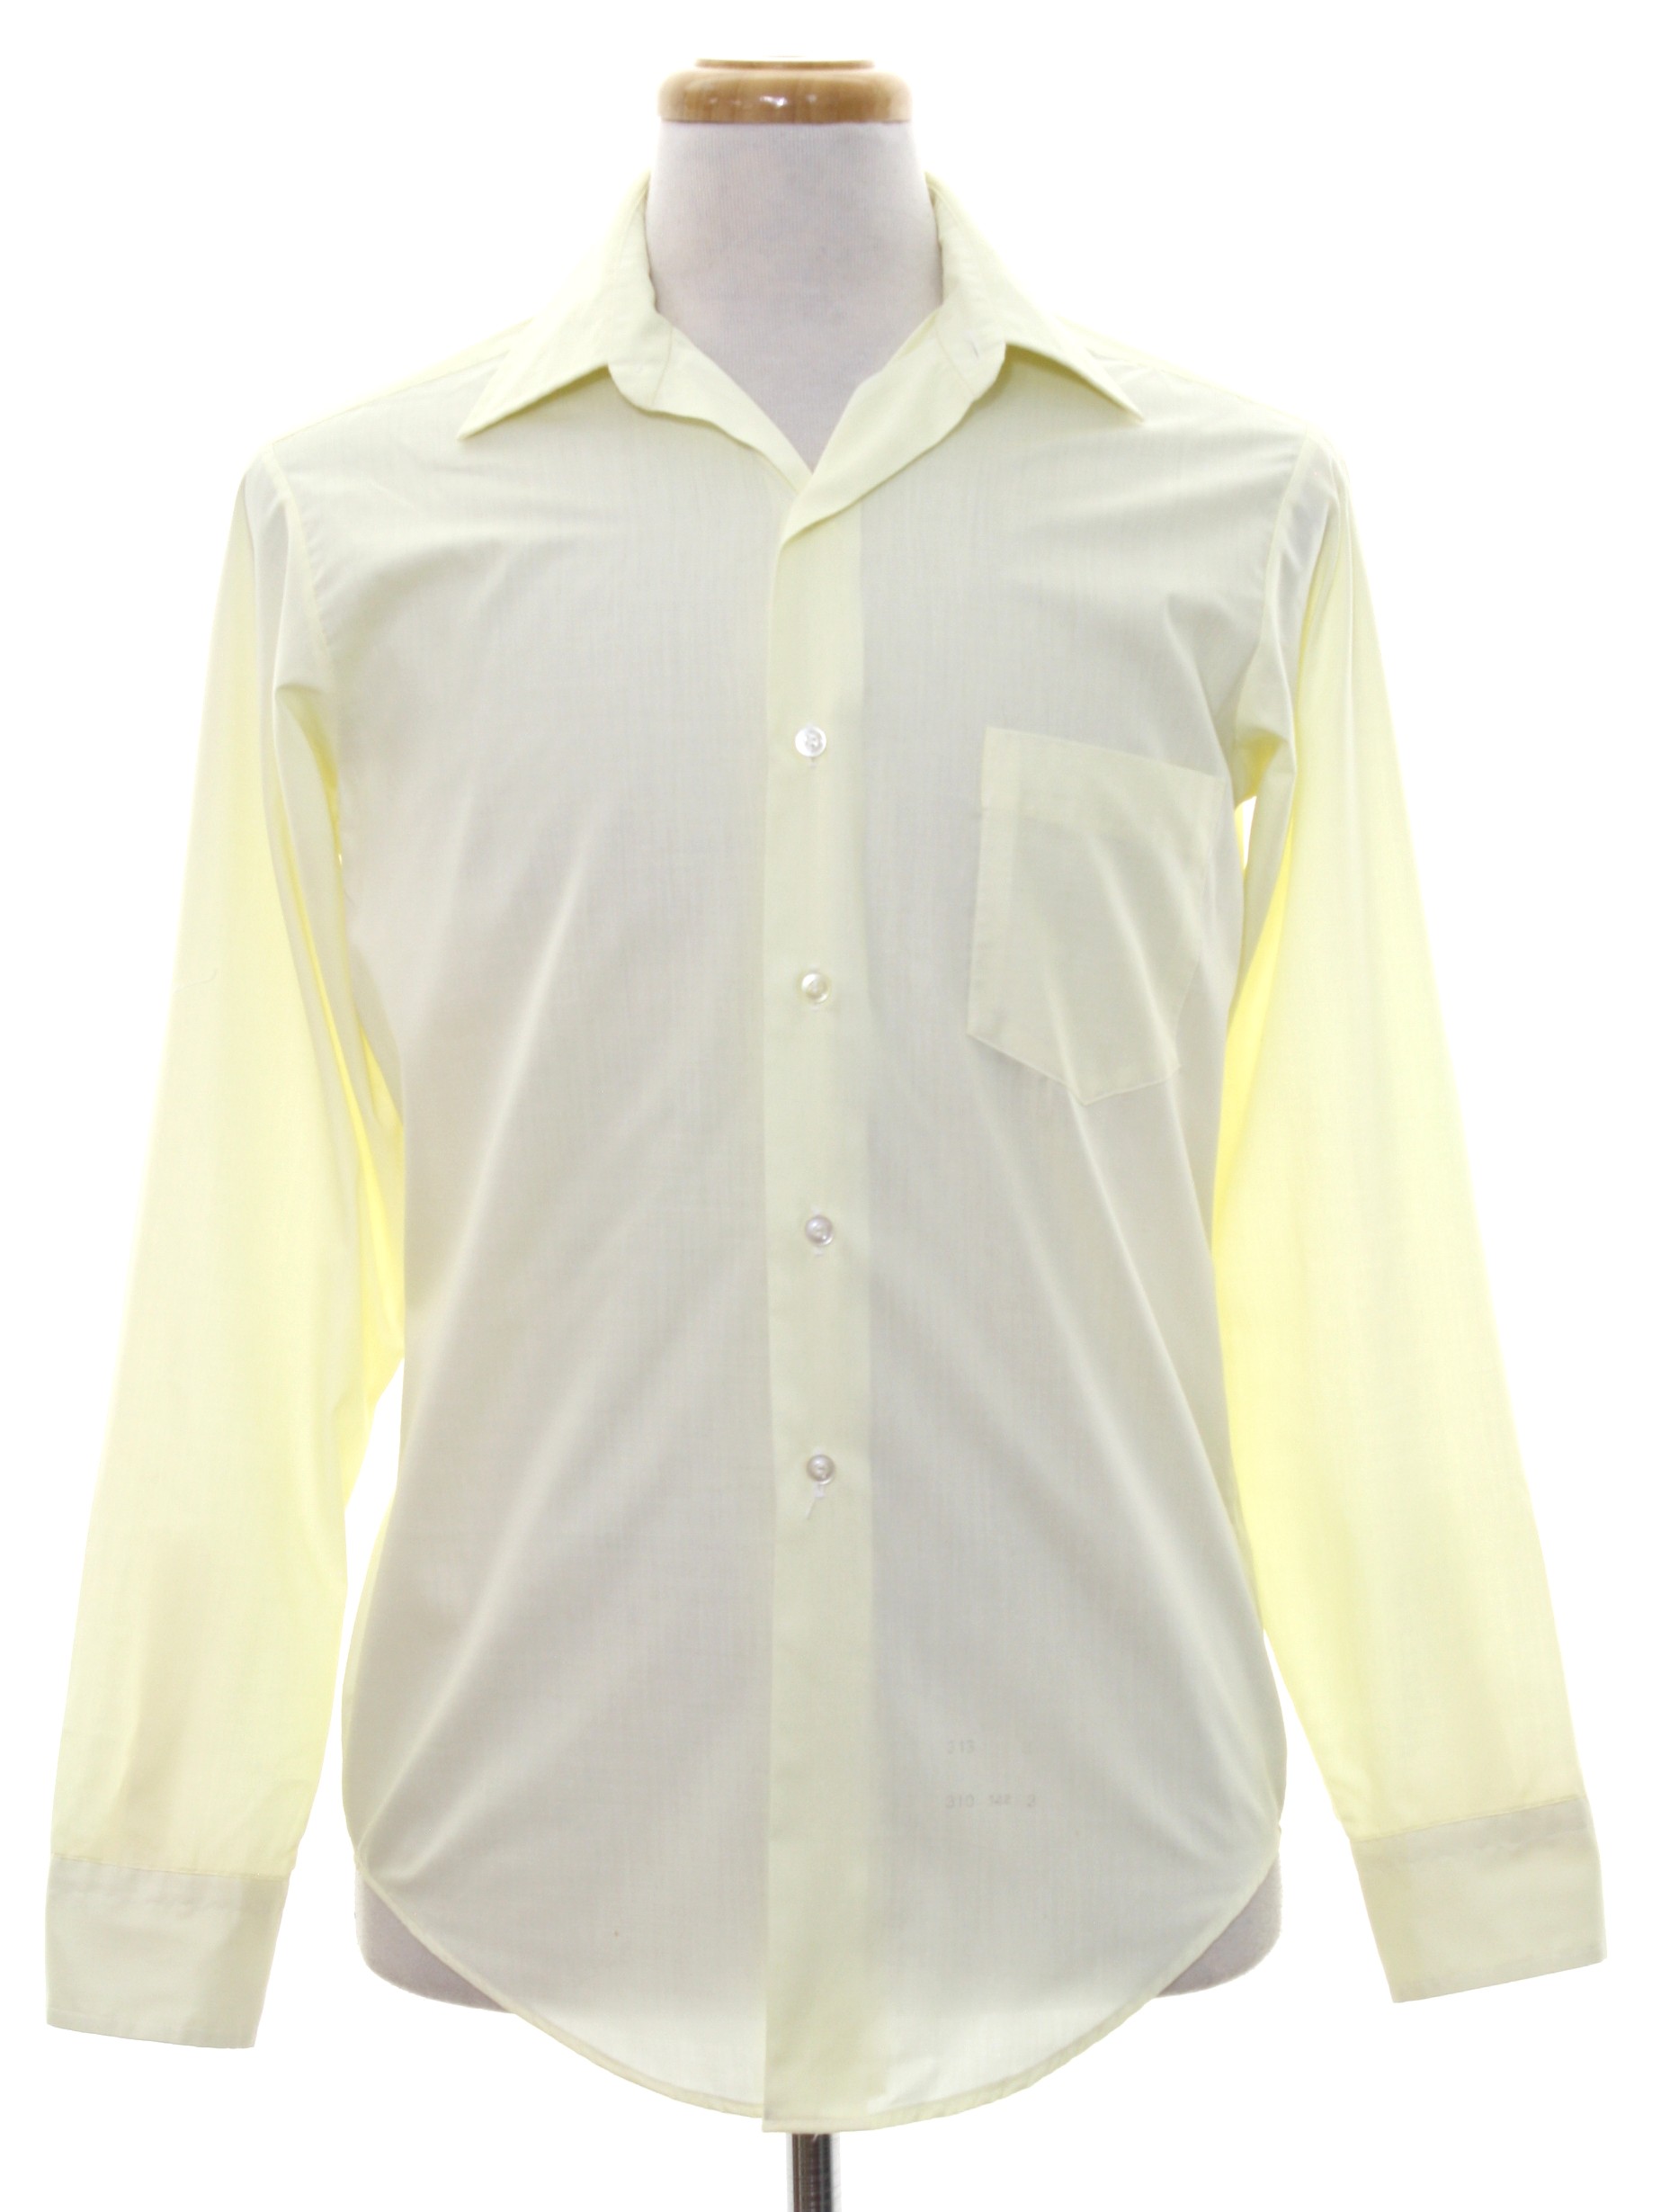 Vintage Permantently Pressed 1960s Shirt: 60s -Permantently Pressed ...